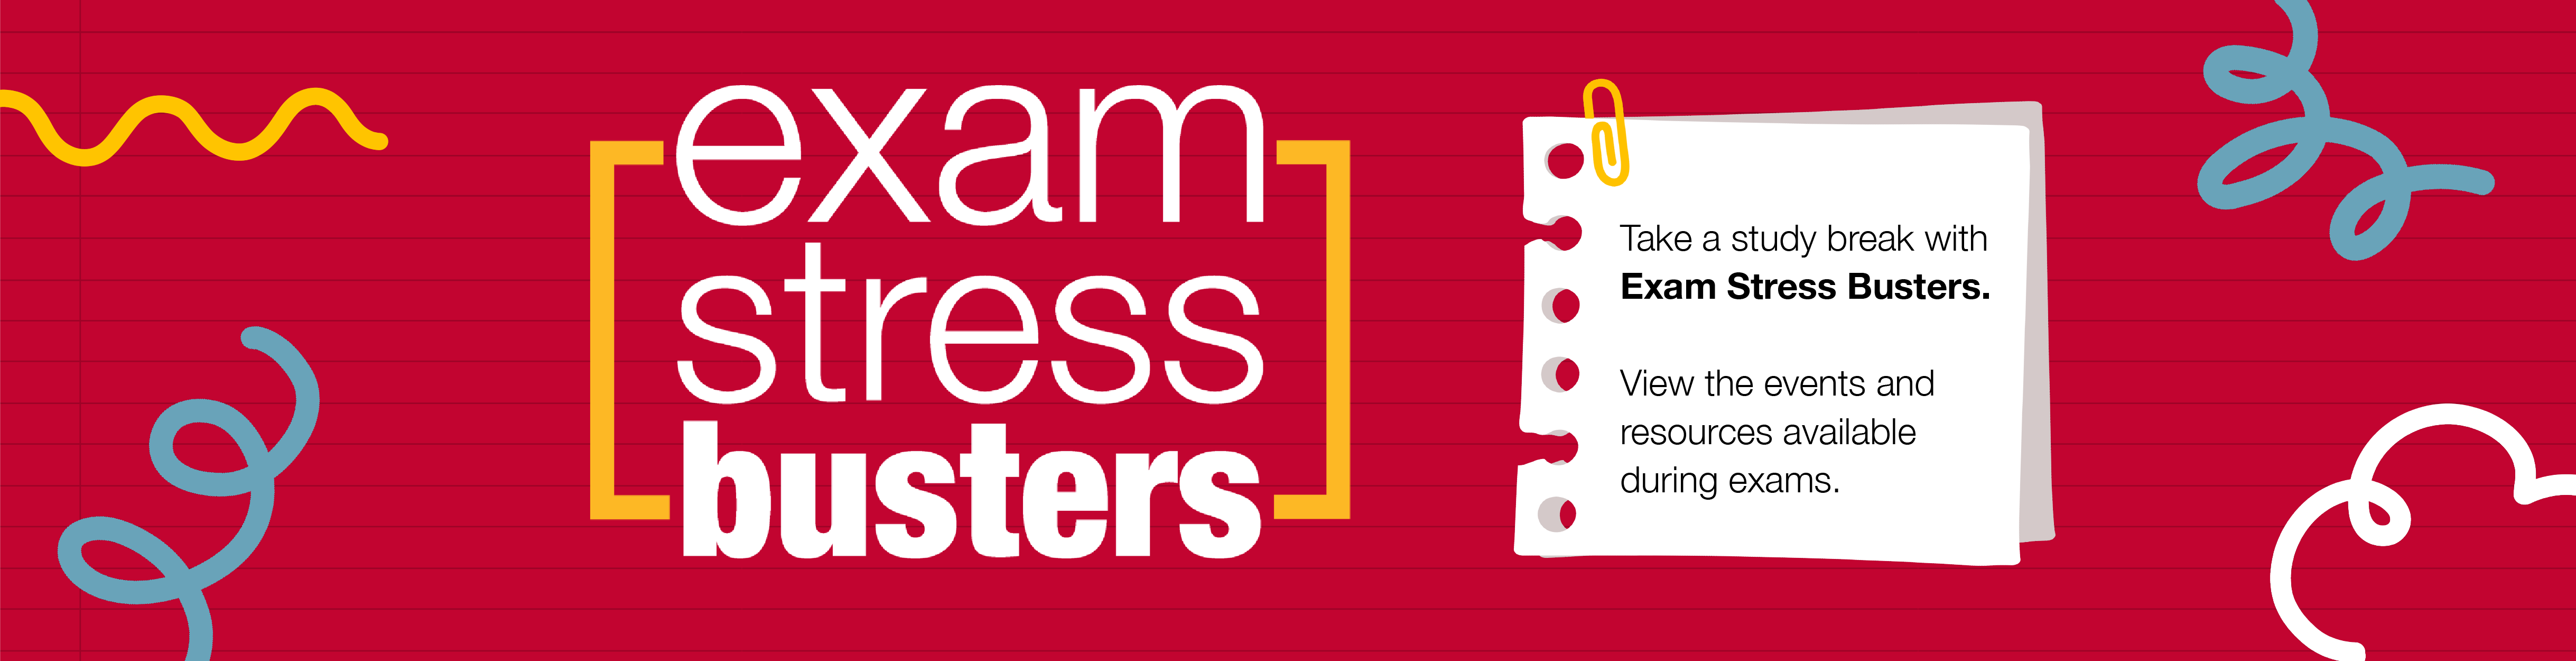 Exam Stress Busters. Take a study break with Exam Stress Busters. View the events and resources available during exams.